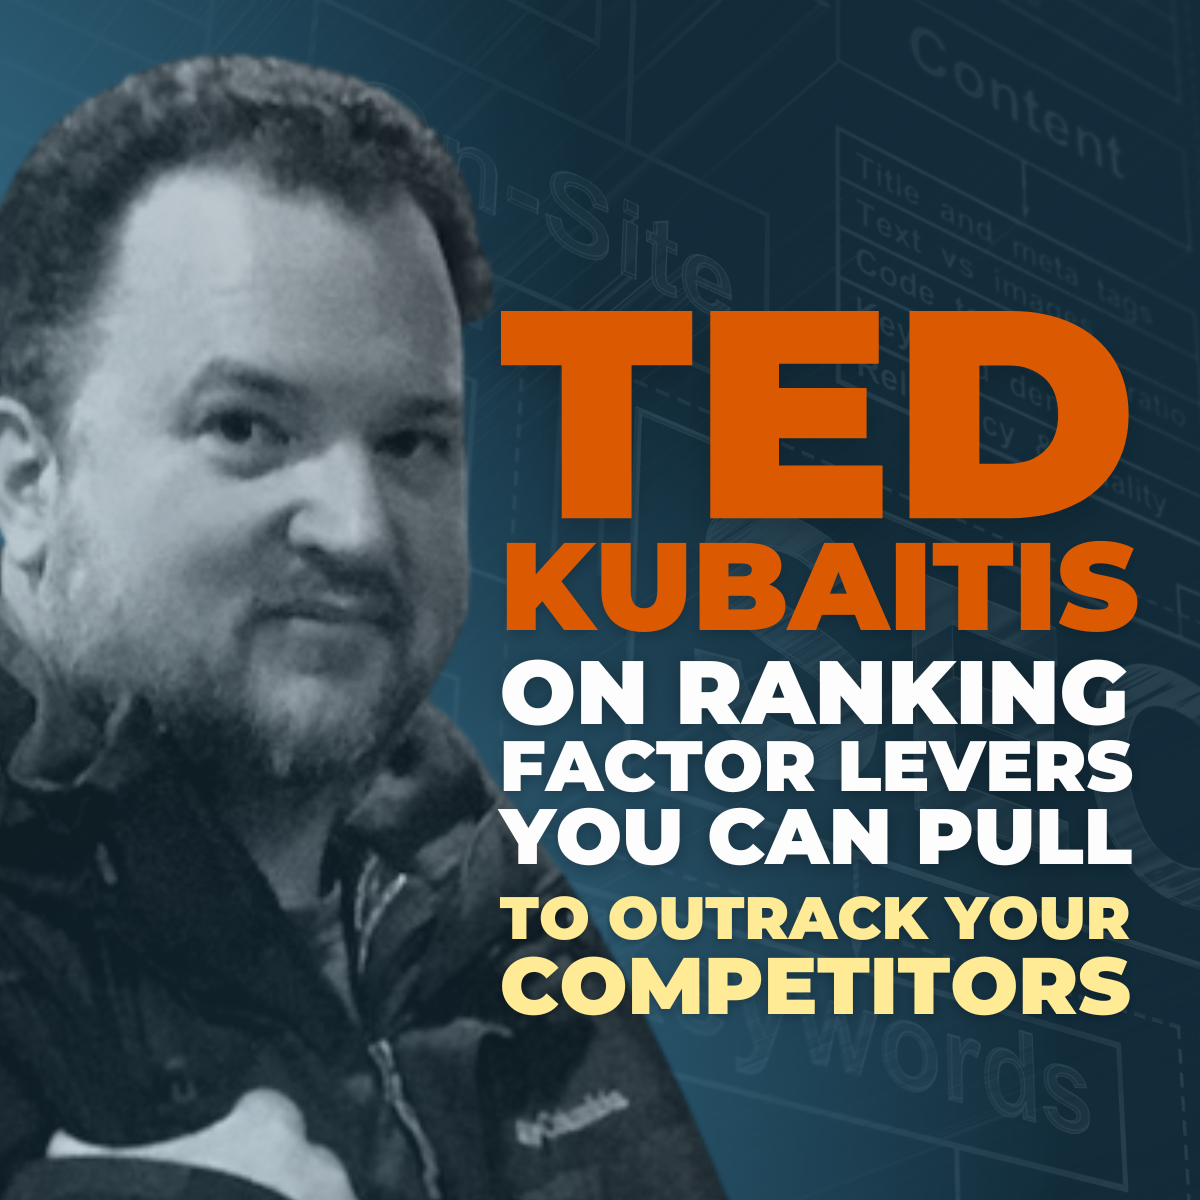 Ted Kubaitis on ranking factor levers you can pull to outrack your competitors